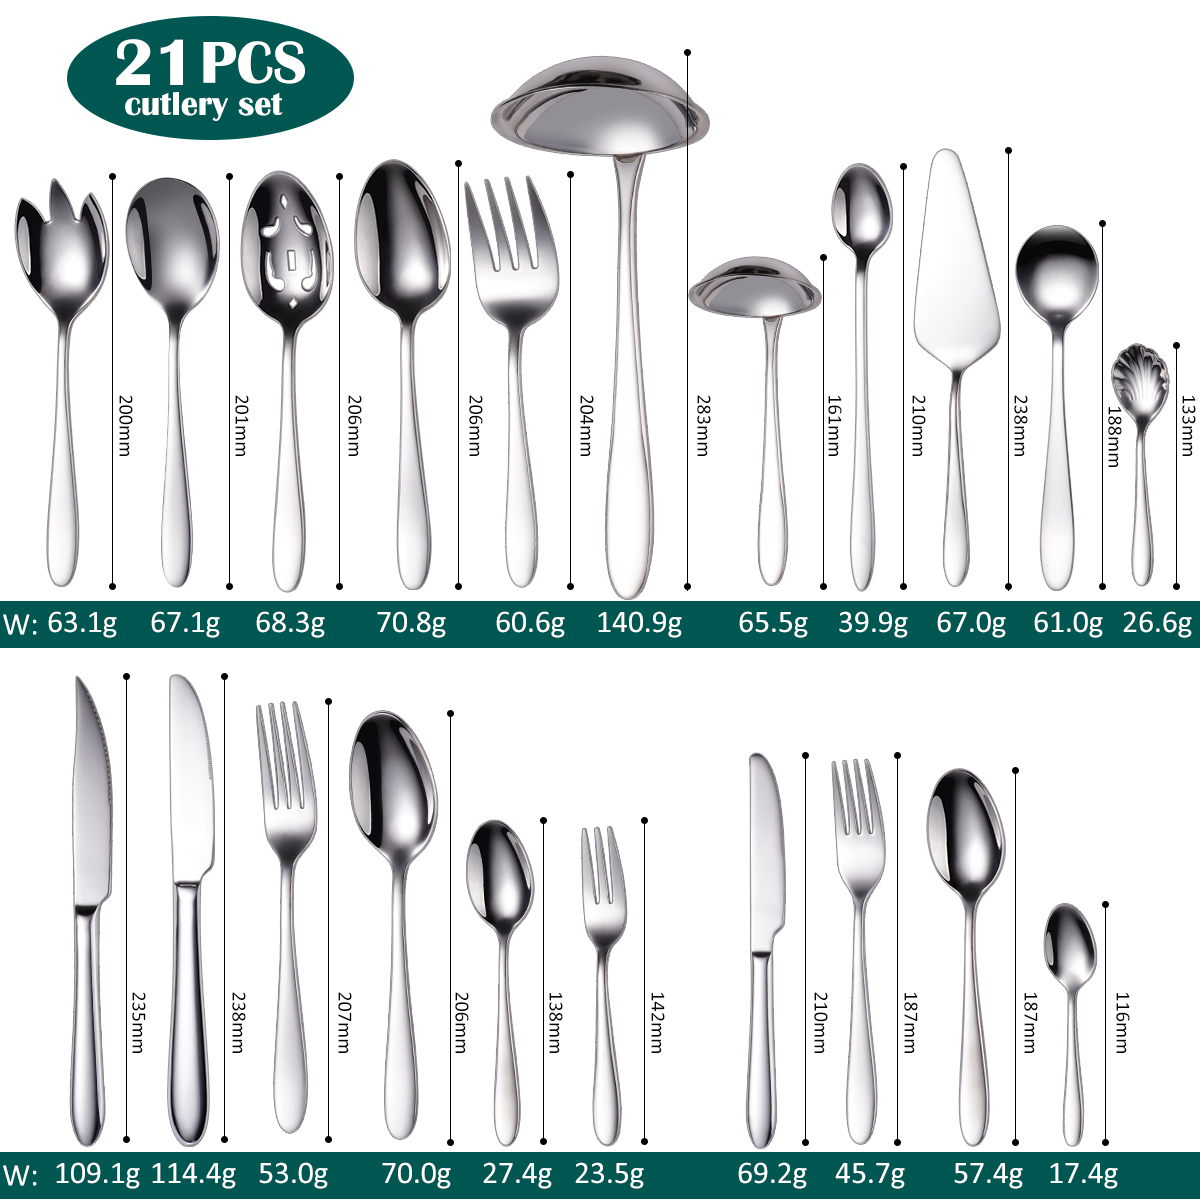 Stainless Steel Cutlery 18/10